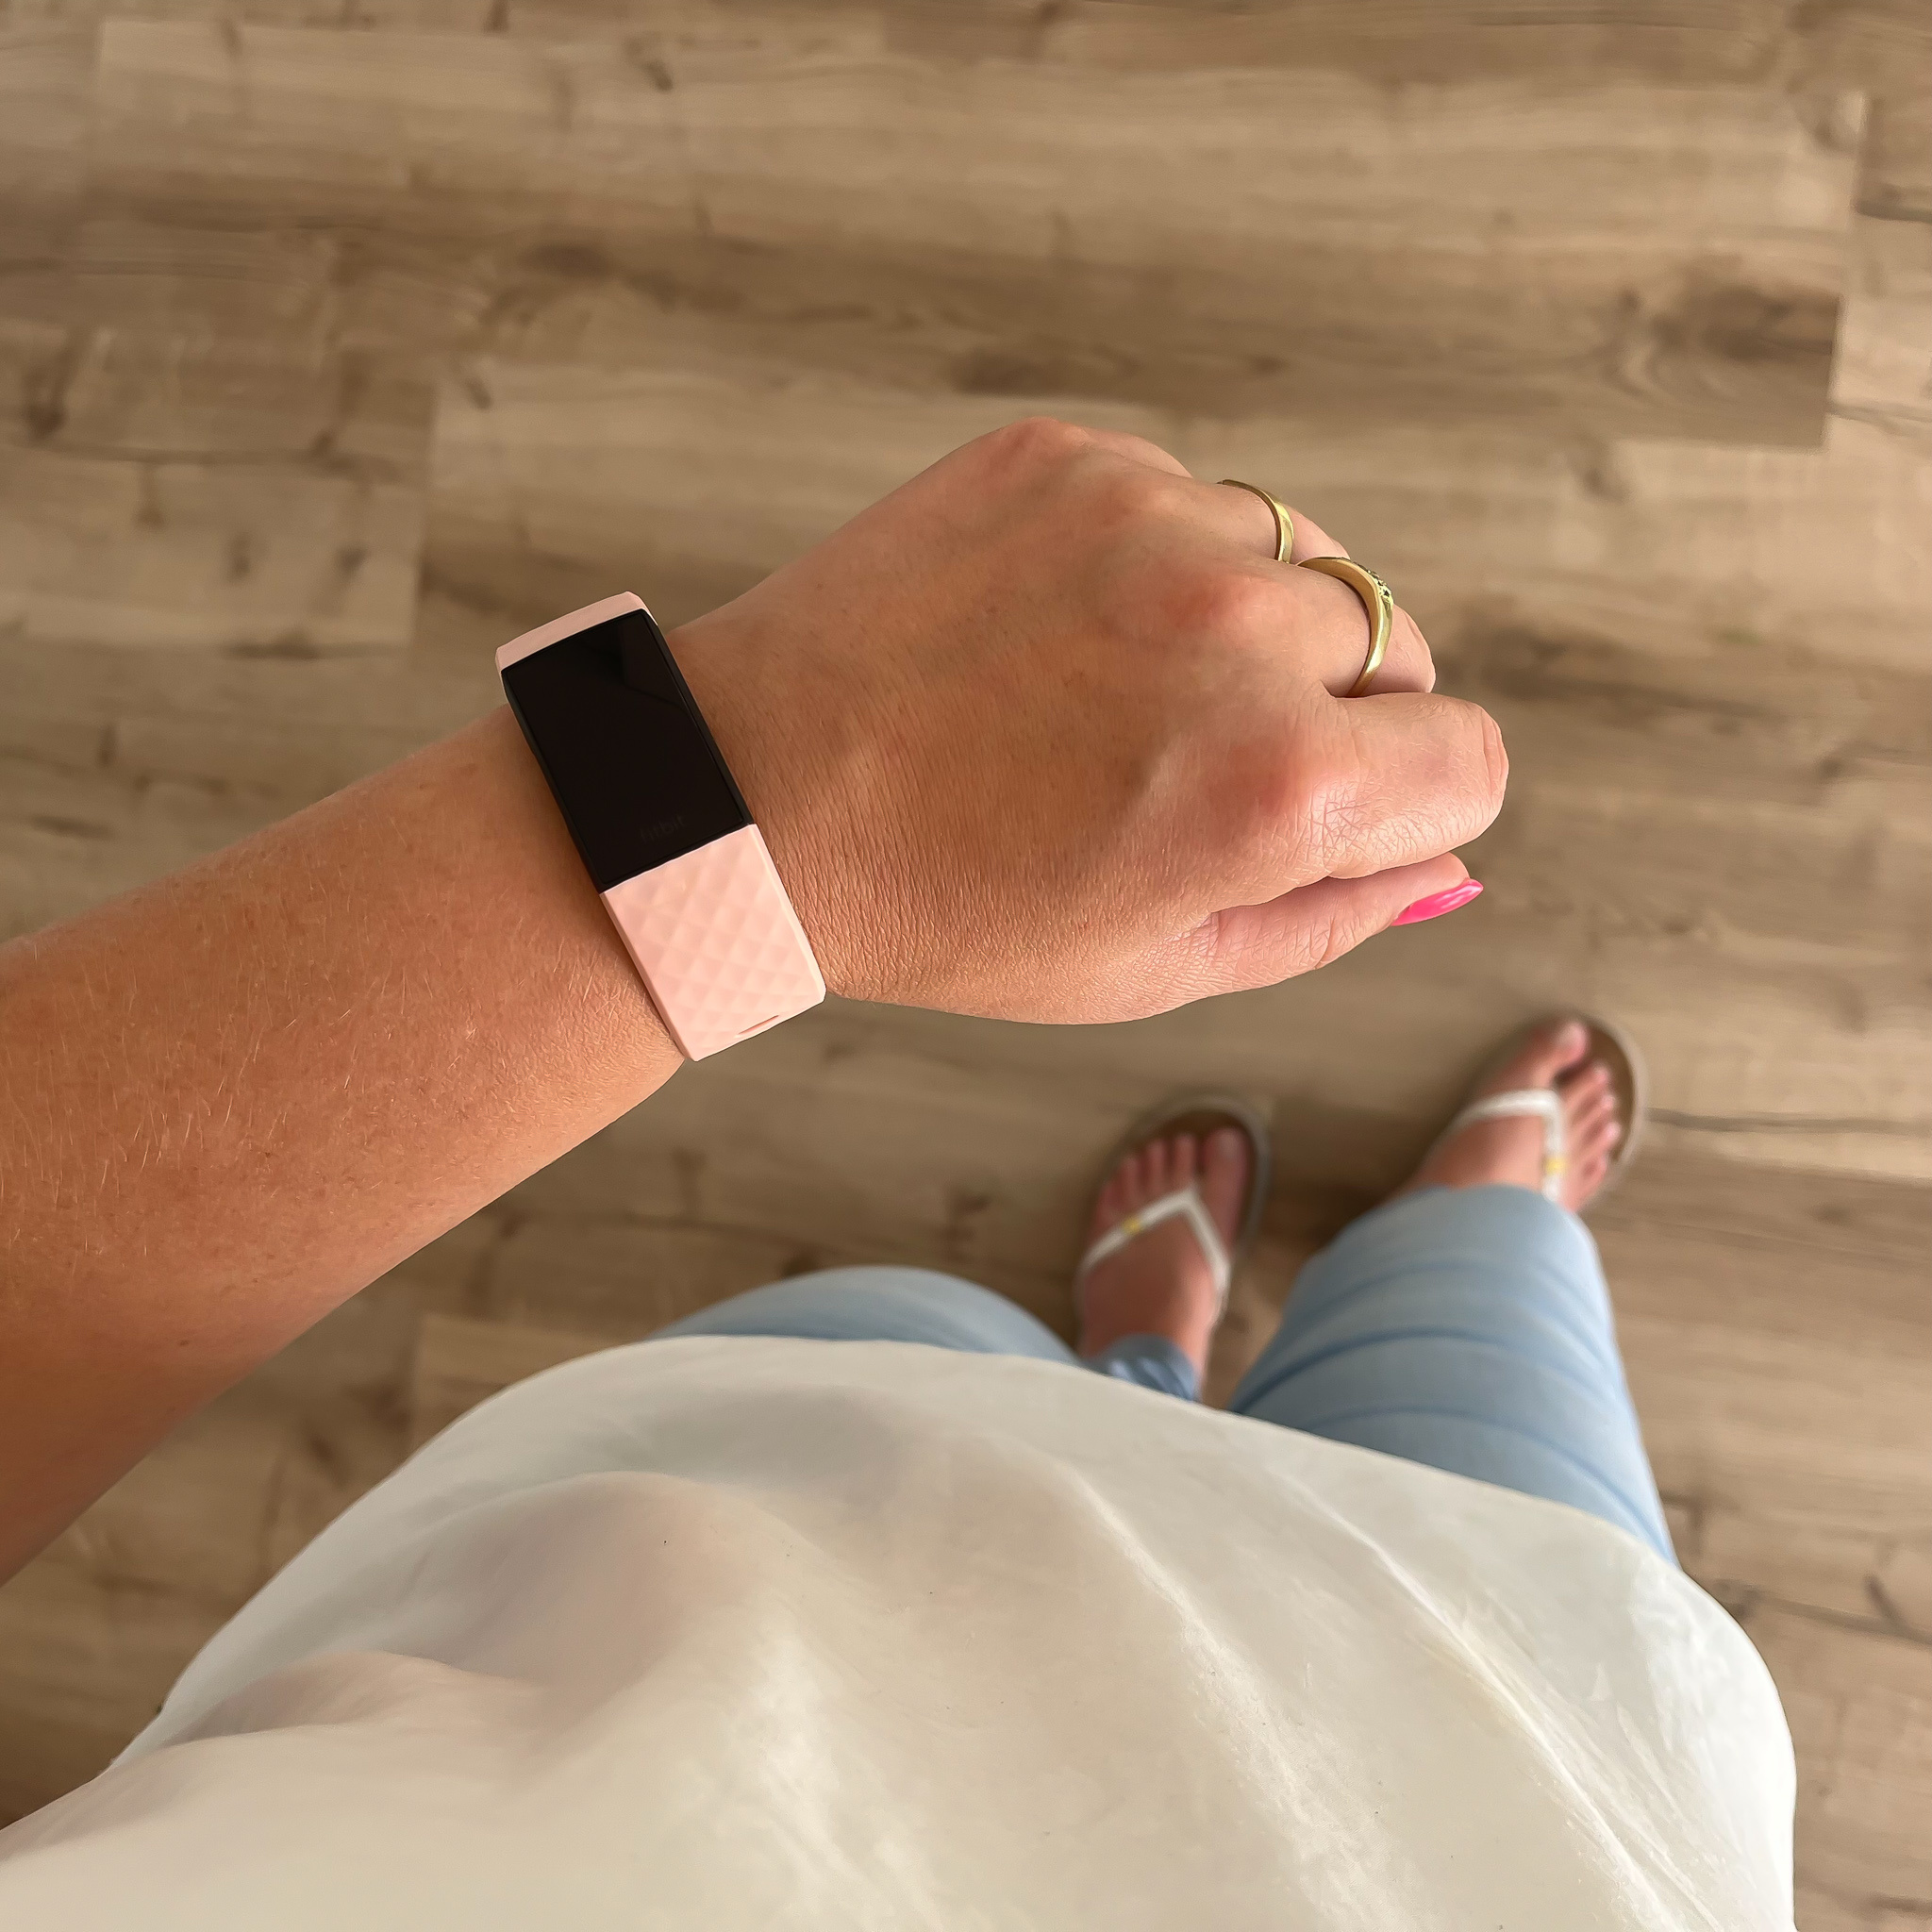 Fitbit Charge 3 &Amp; 4 Sport Waffle Strap - Pink